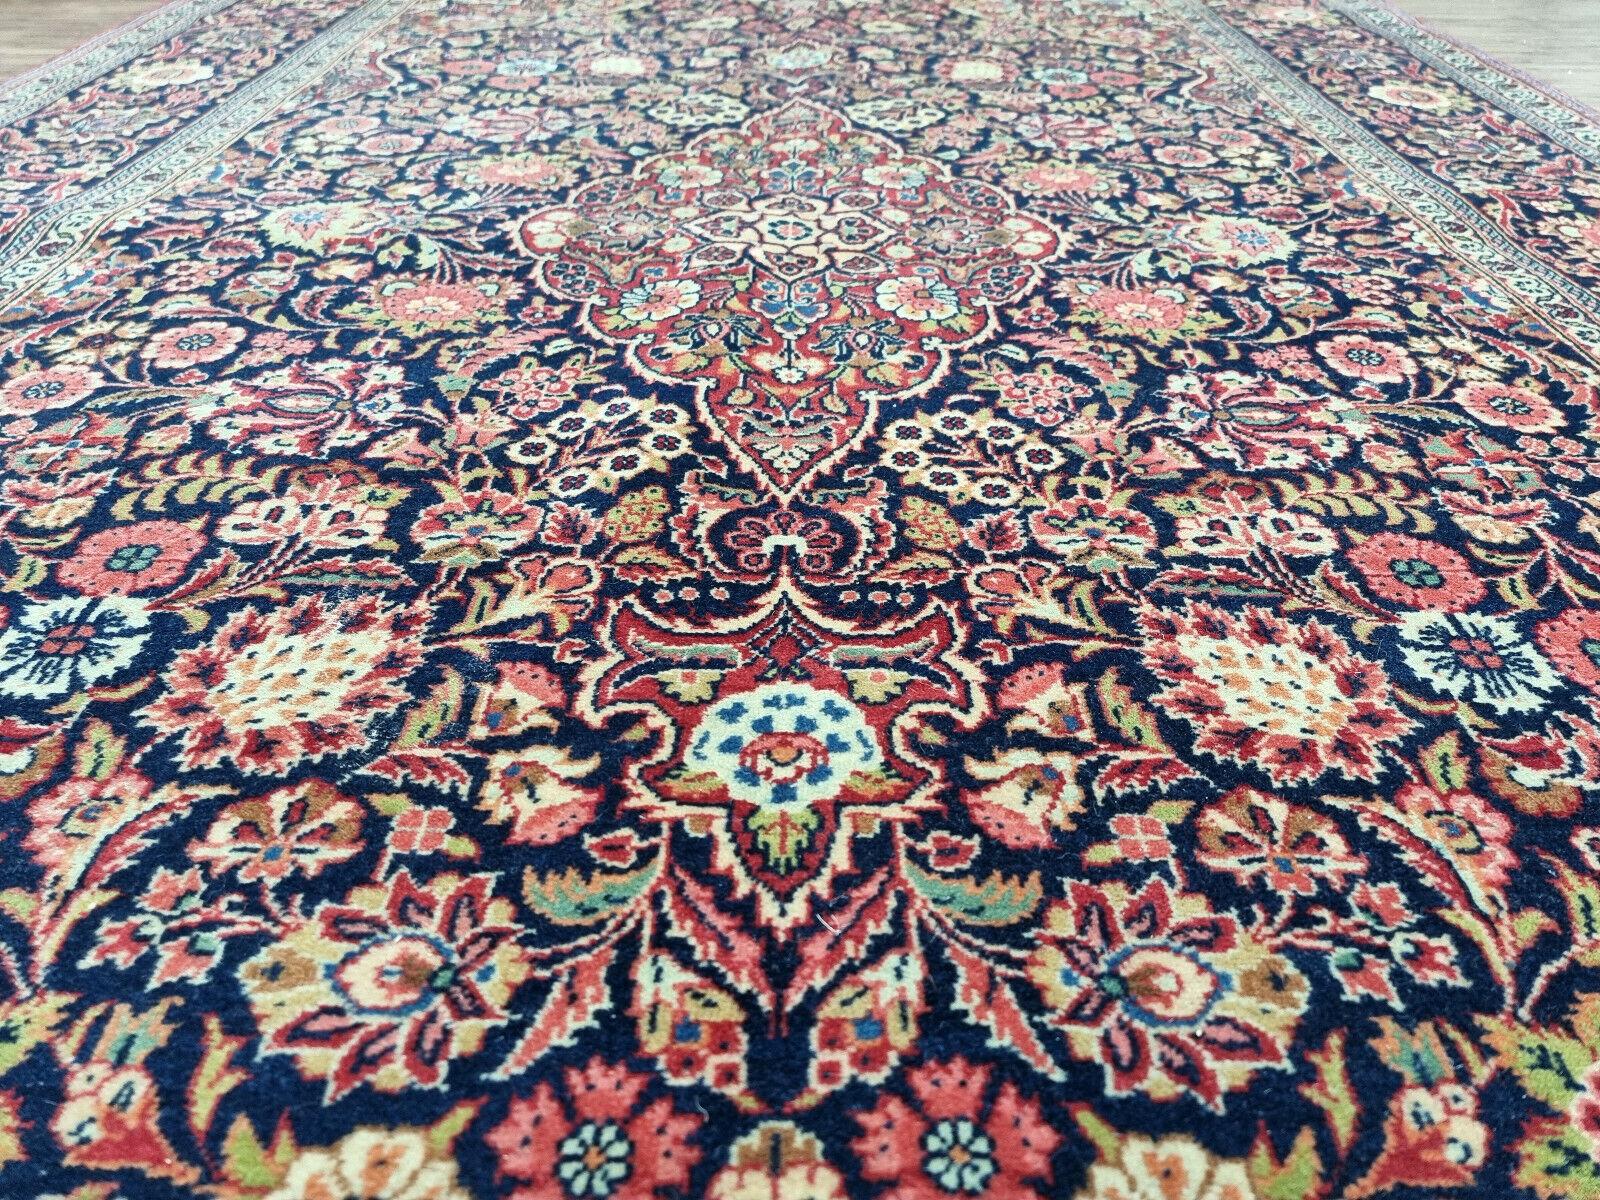 Handmade Antique Persian Style Kashan Rug 4.3' x 6.6', 1920s - 1D77 For Sale 4